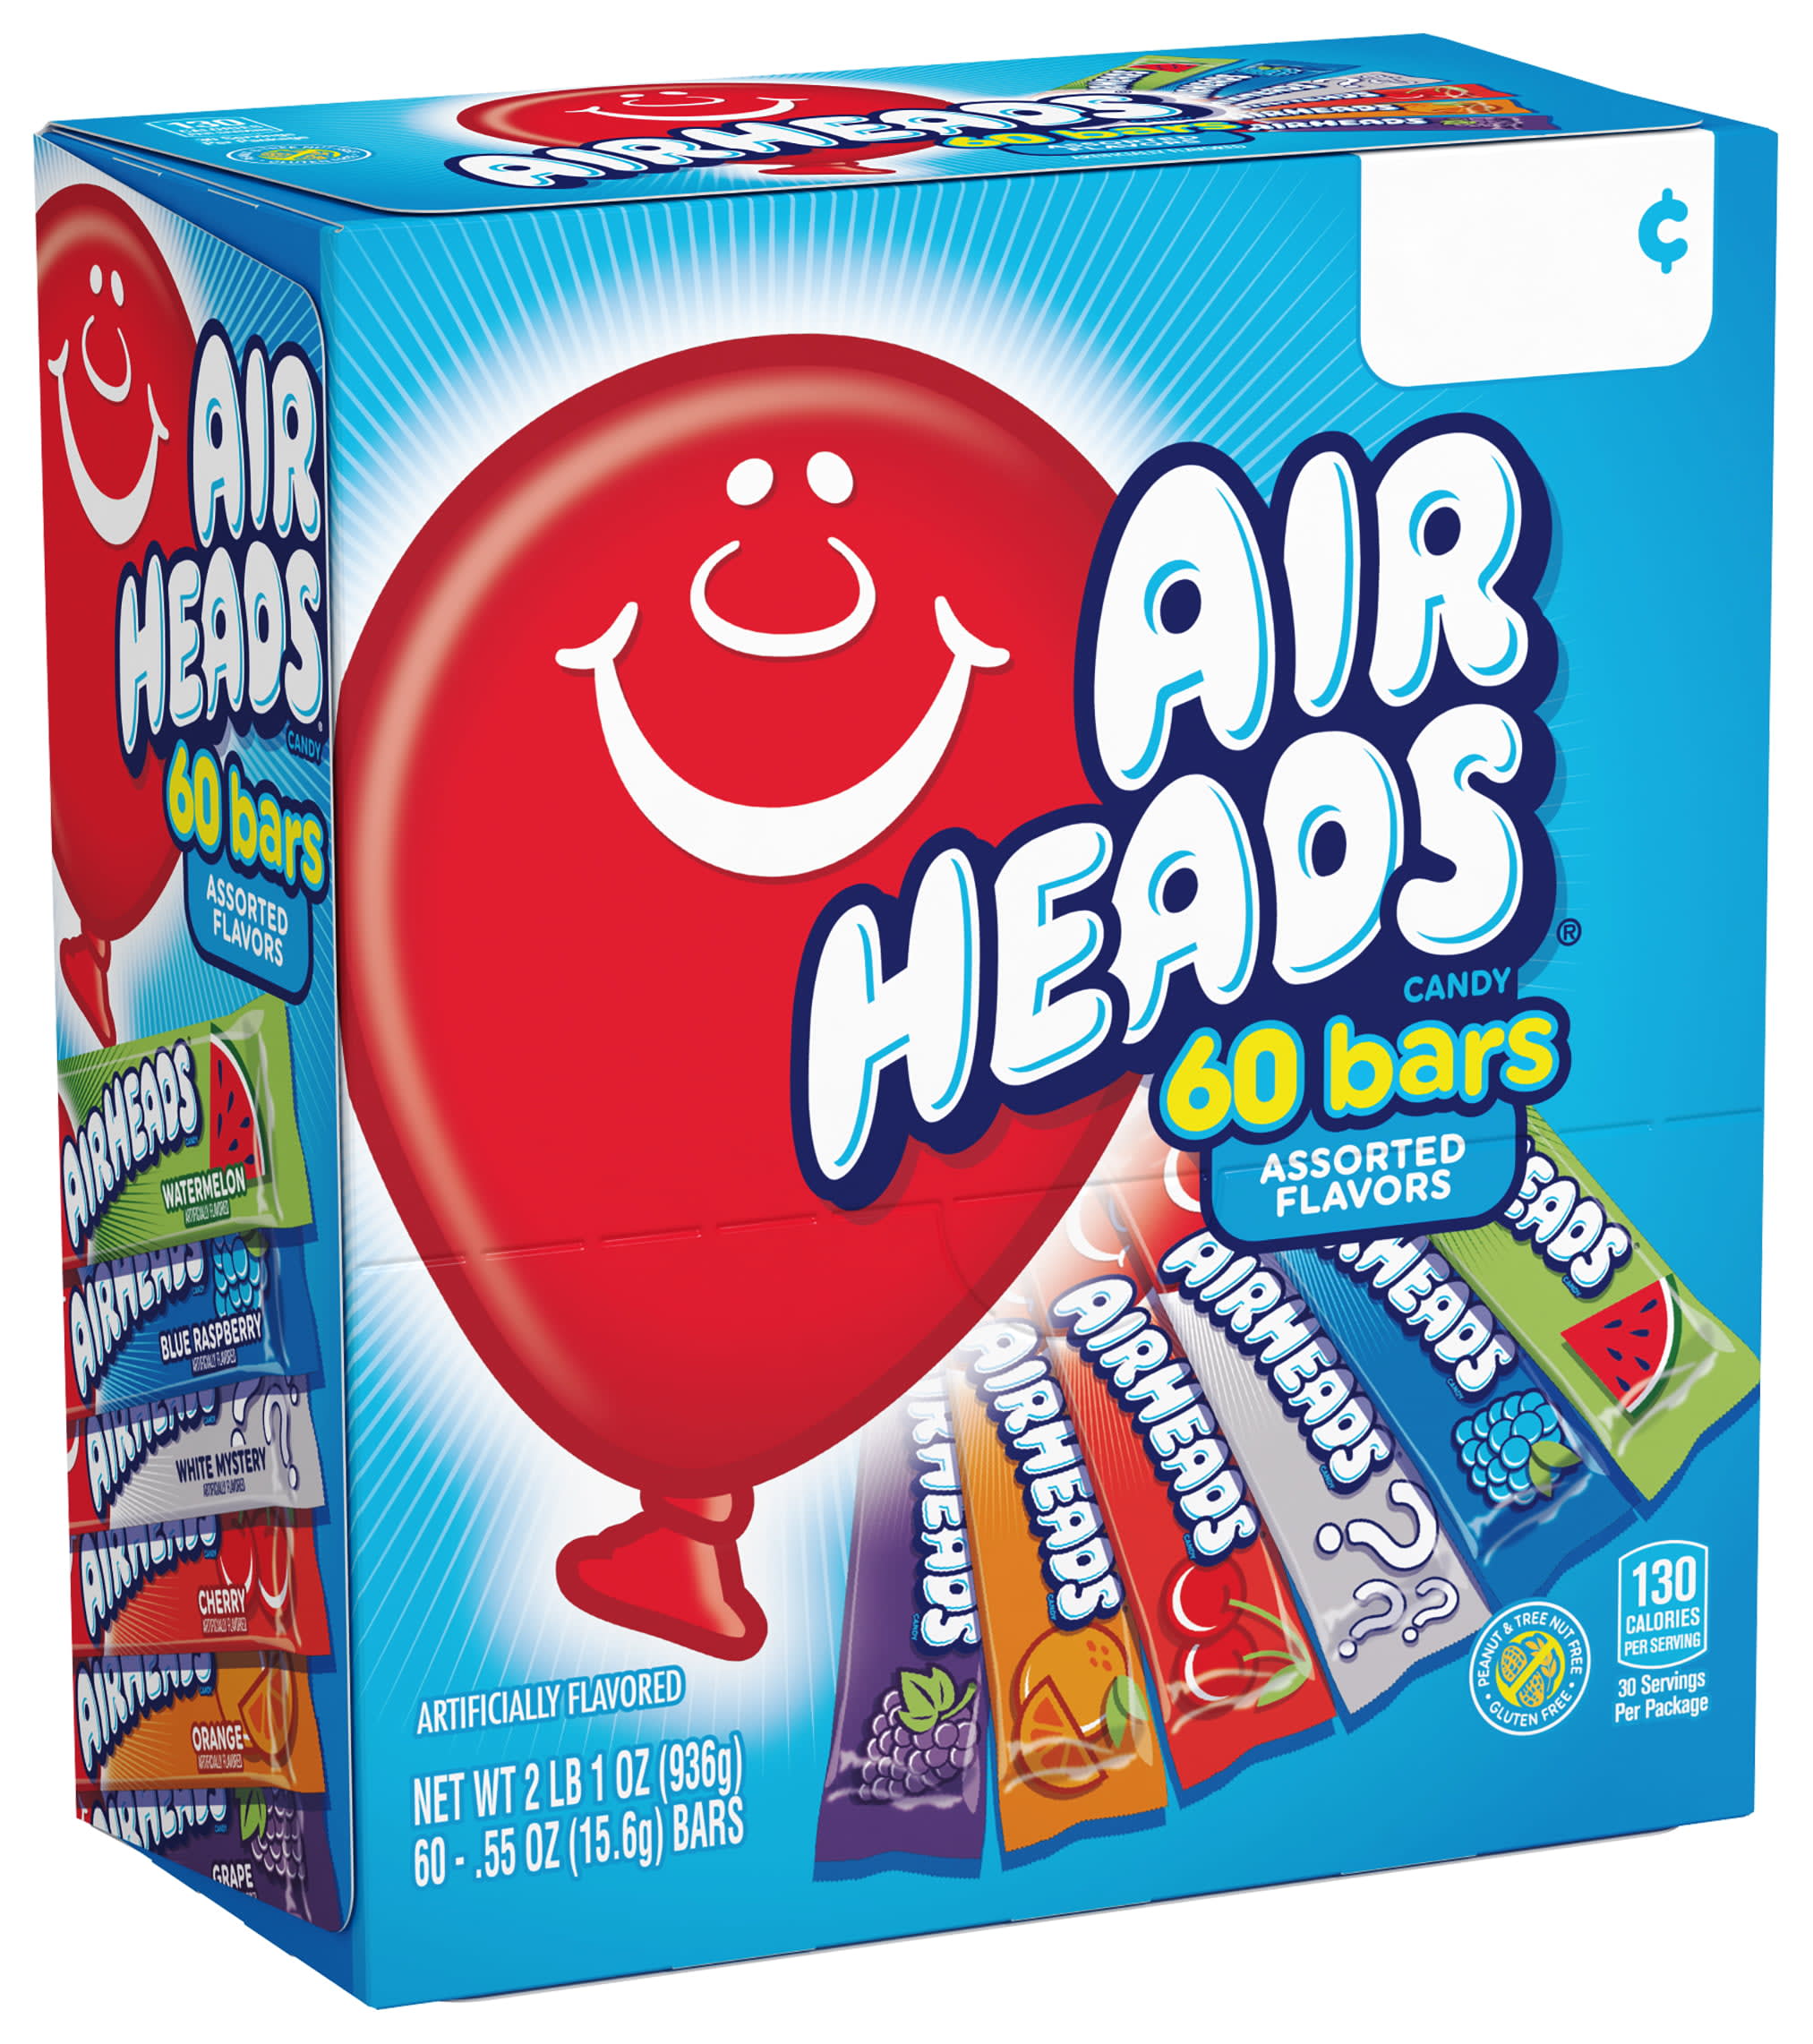 Airheads Bites Chewy Candy, Fruit - 9 oz bag